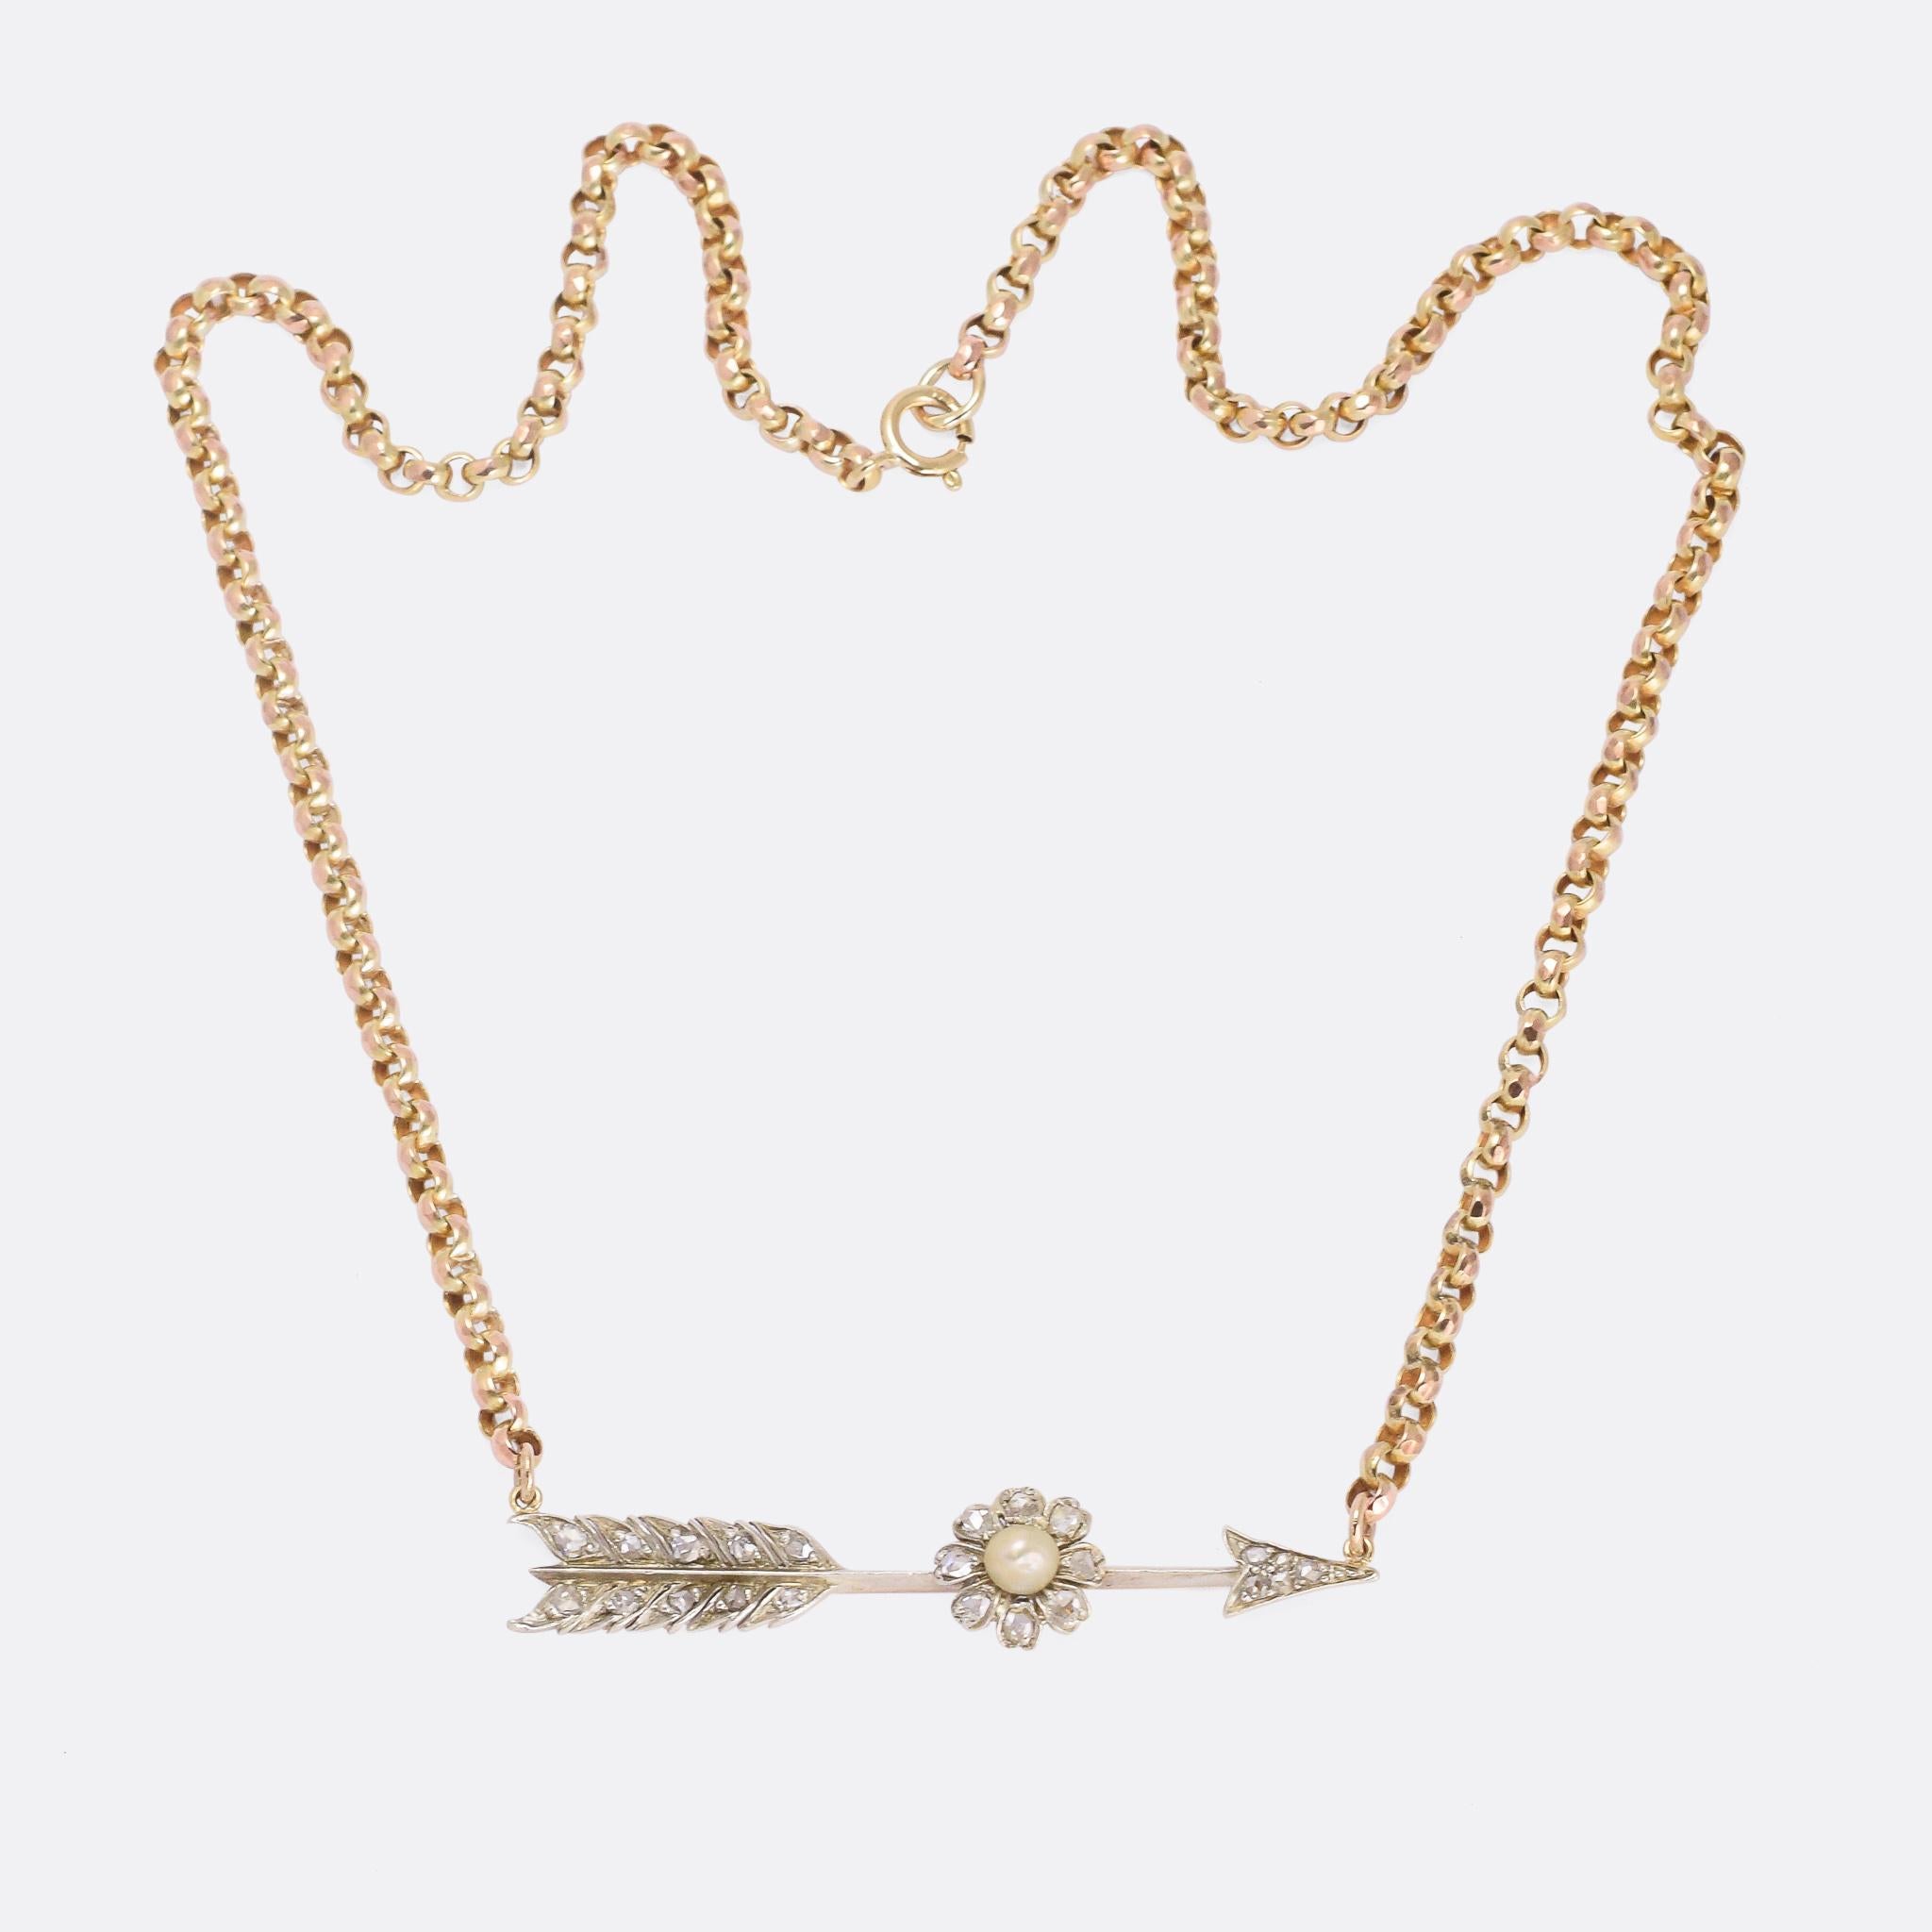 A superb antique arrow necklace dating from the mid Victorian era, circa 1870. We've added a period belcher chain in 9 karat gold with round faceted links. The arrow itself is set with rose cut diamonds and features a flower in the middle with